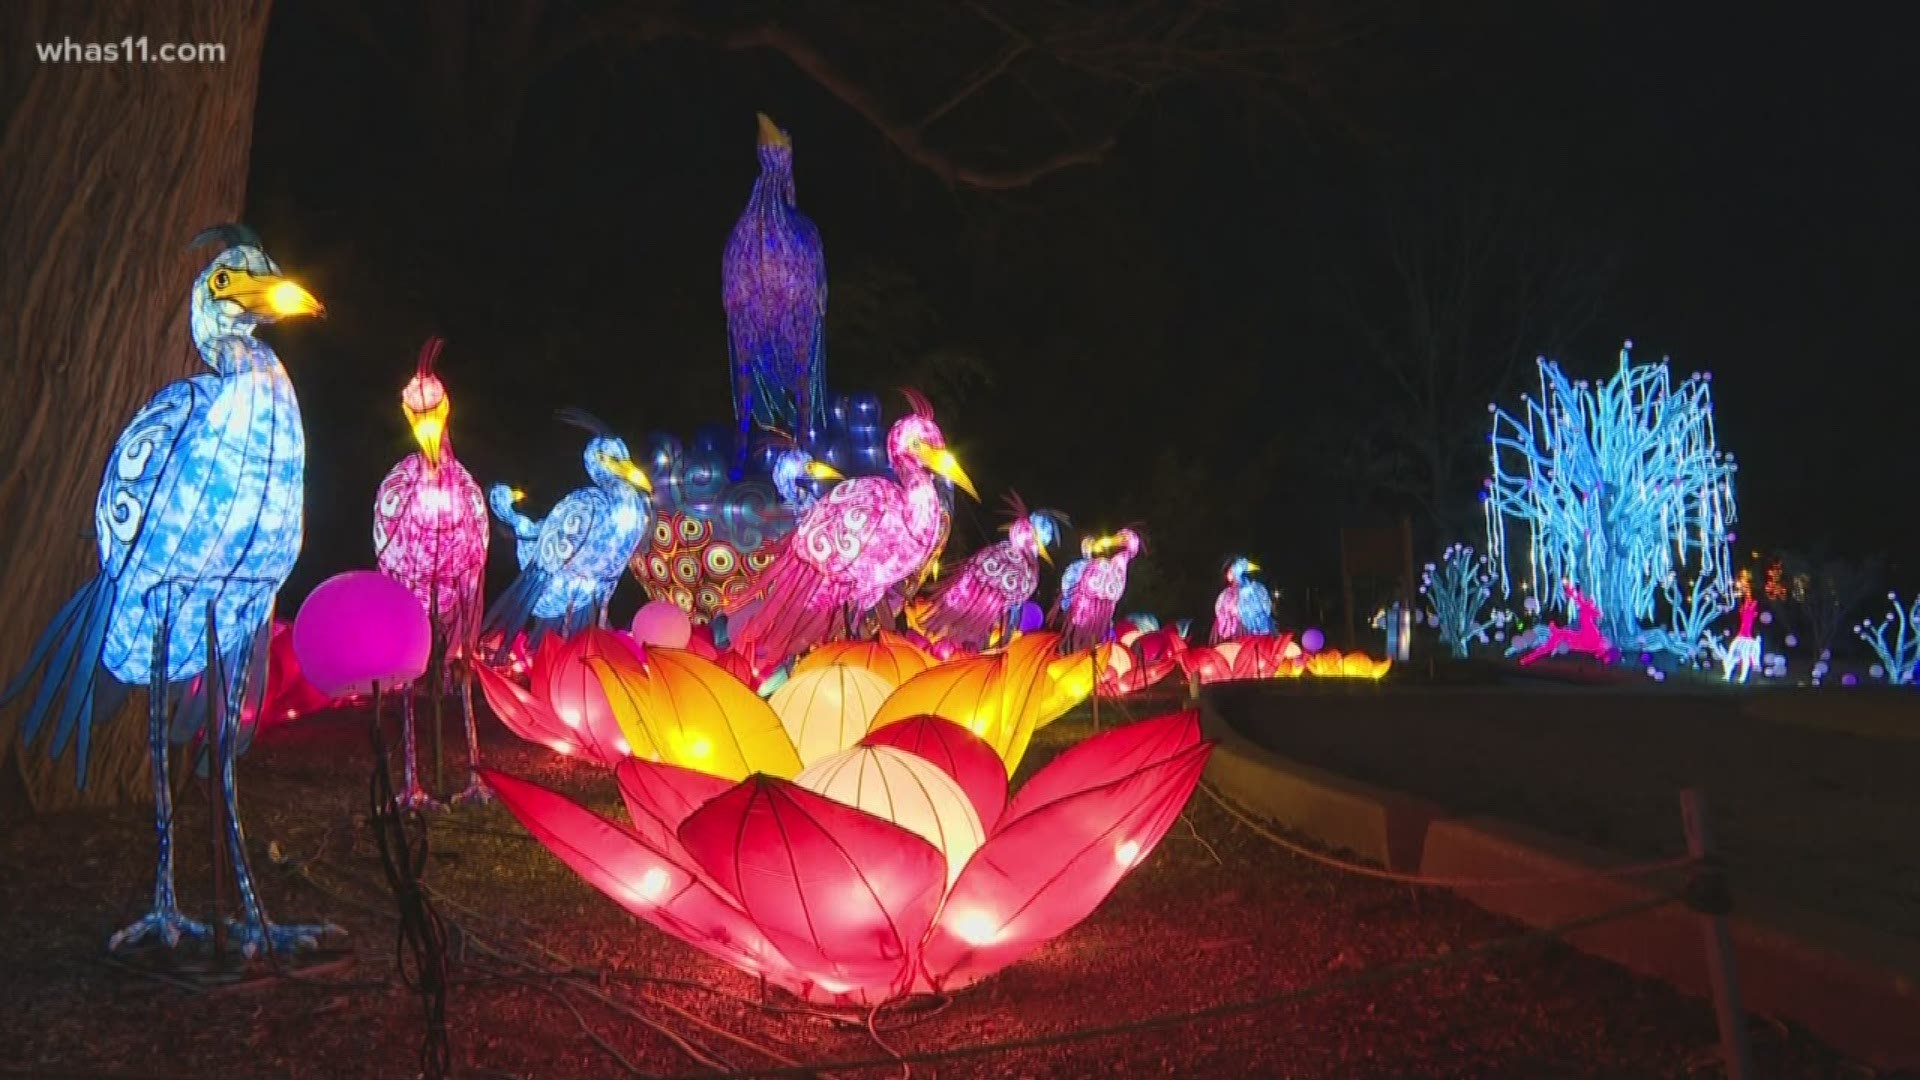 Visit wildlightslouisville.com to learn more about the Wild Lights lantern festival.